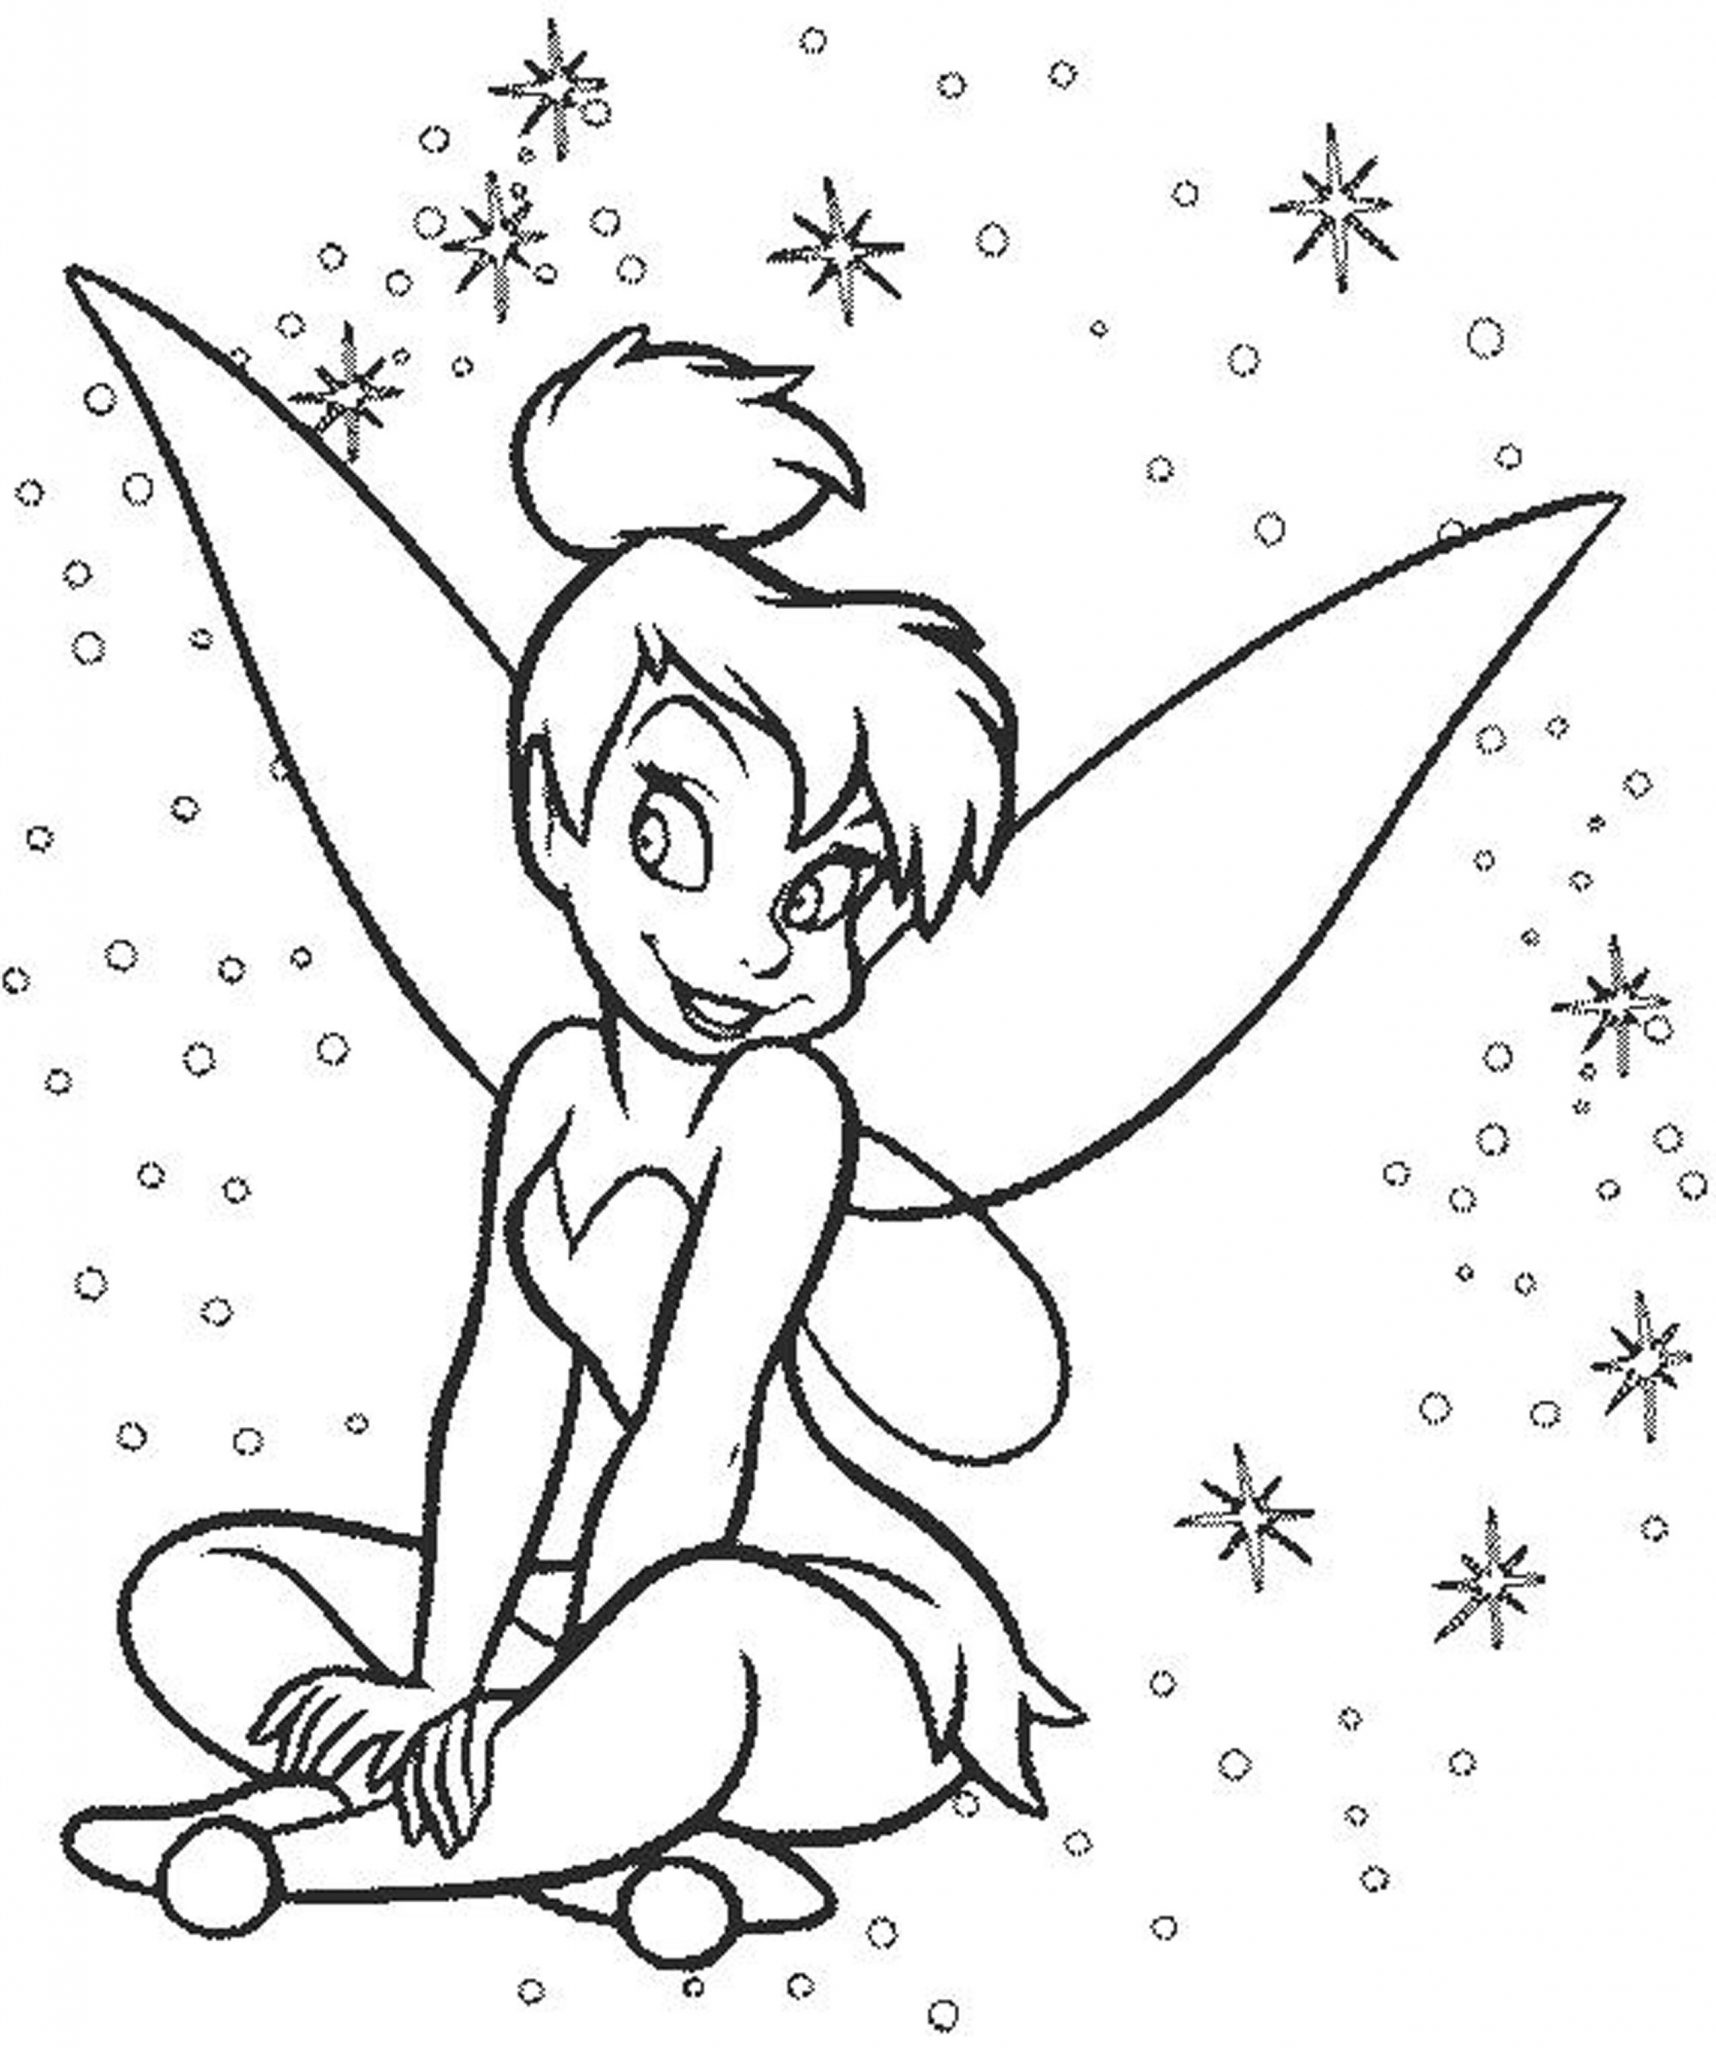 Download 33 Free Disney Coloring Pages for Kids! | BAPS